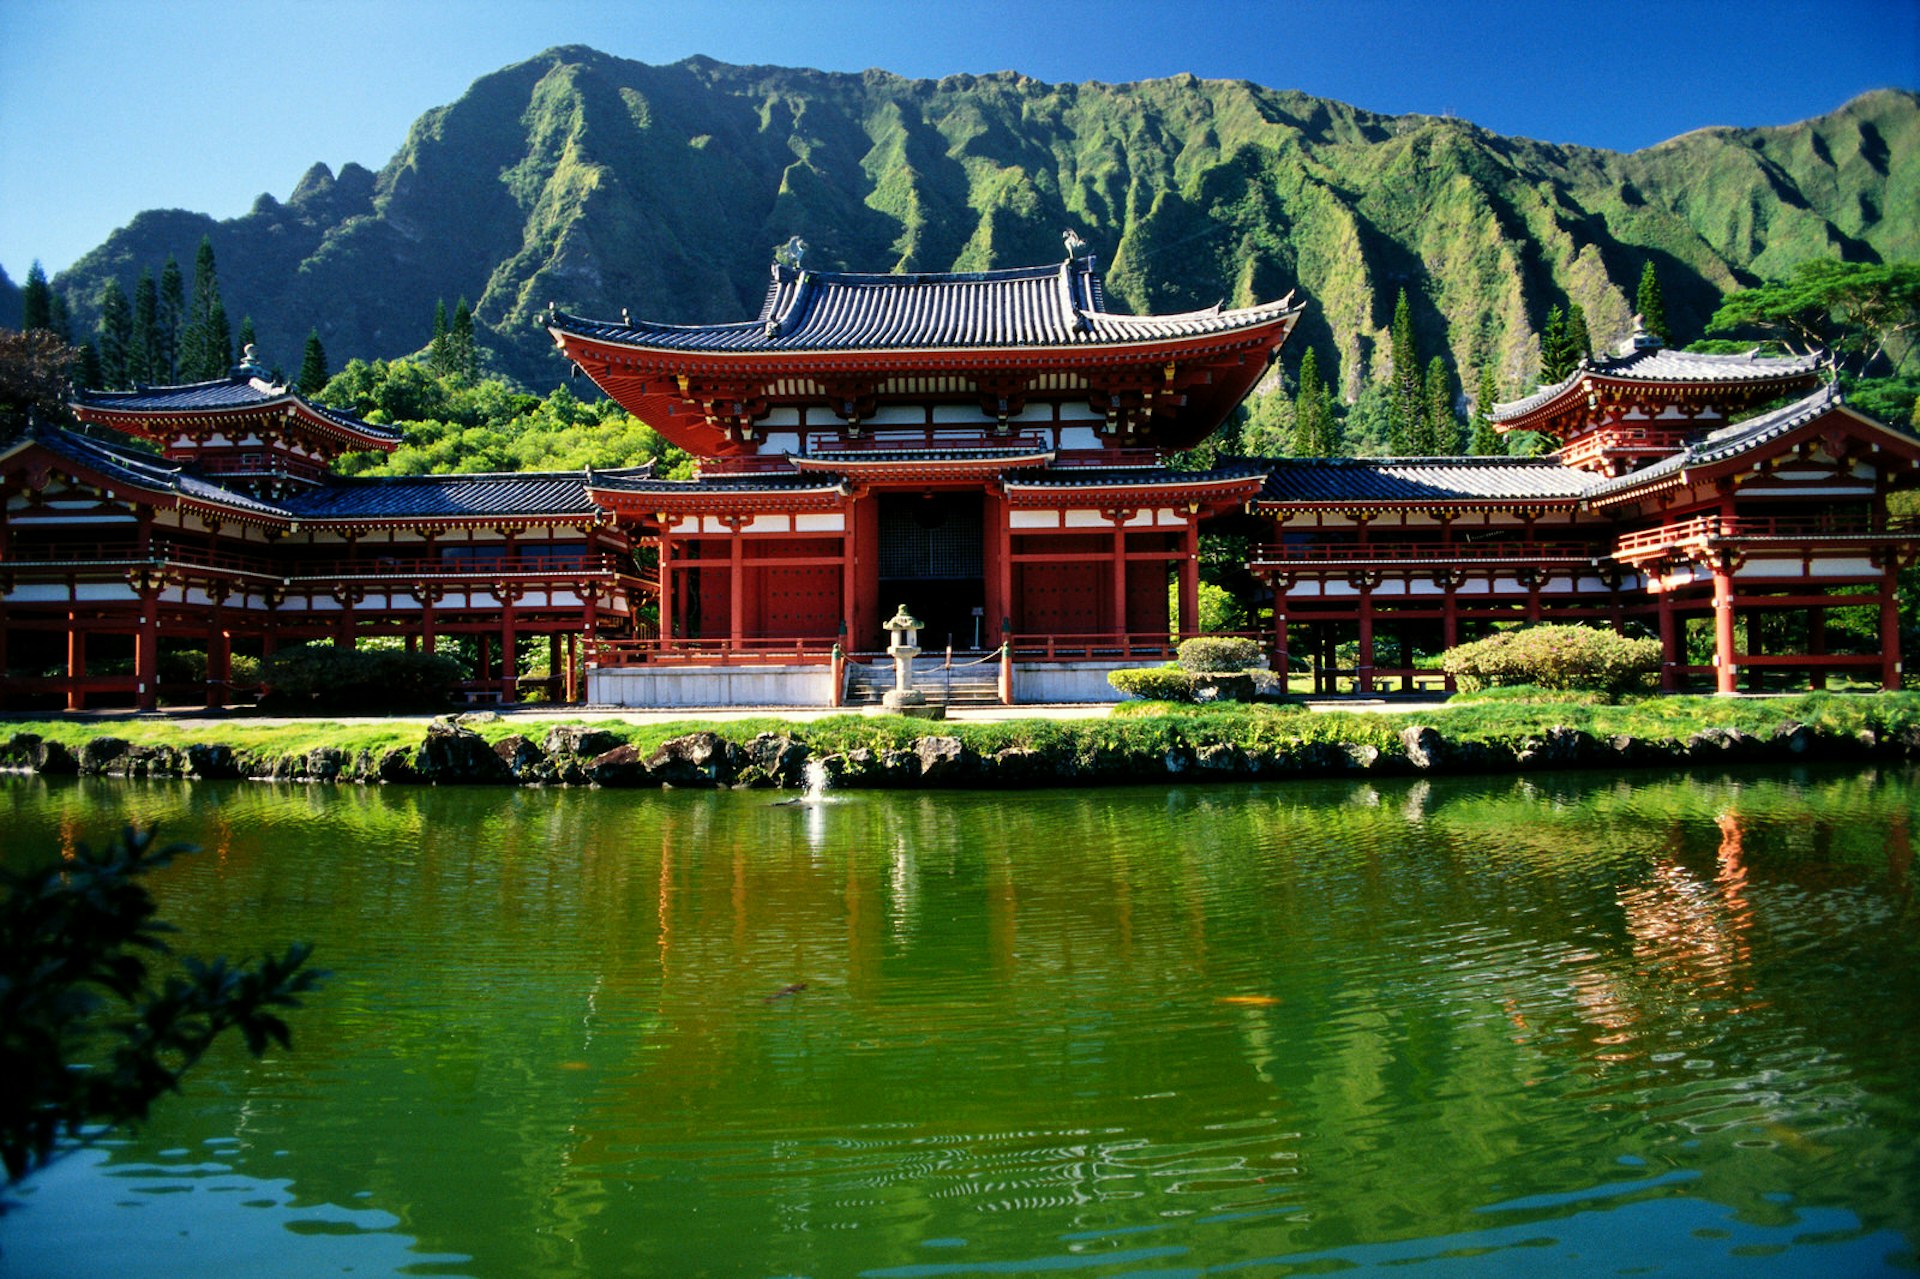 A large japanese-style temple, with red wooden columns and walls, sits at the bottom of a green mountain, and is reflected in the green water of a pond in the foreground © Van de Ven Mary / Getty Images